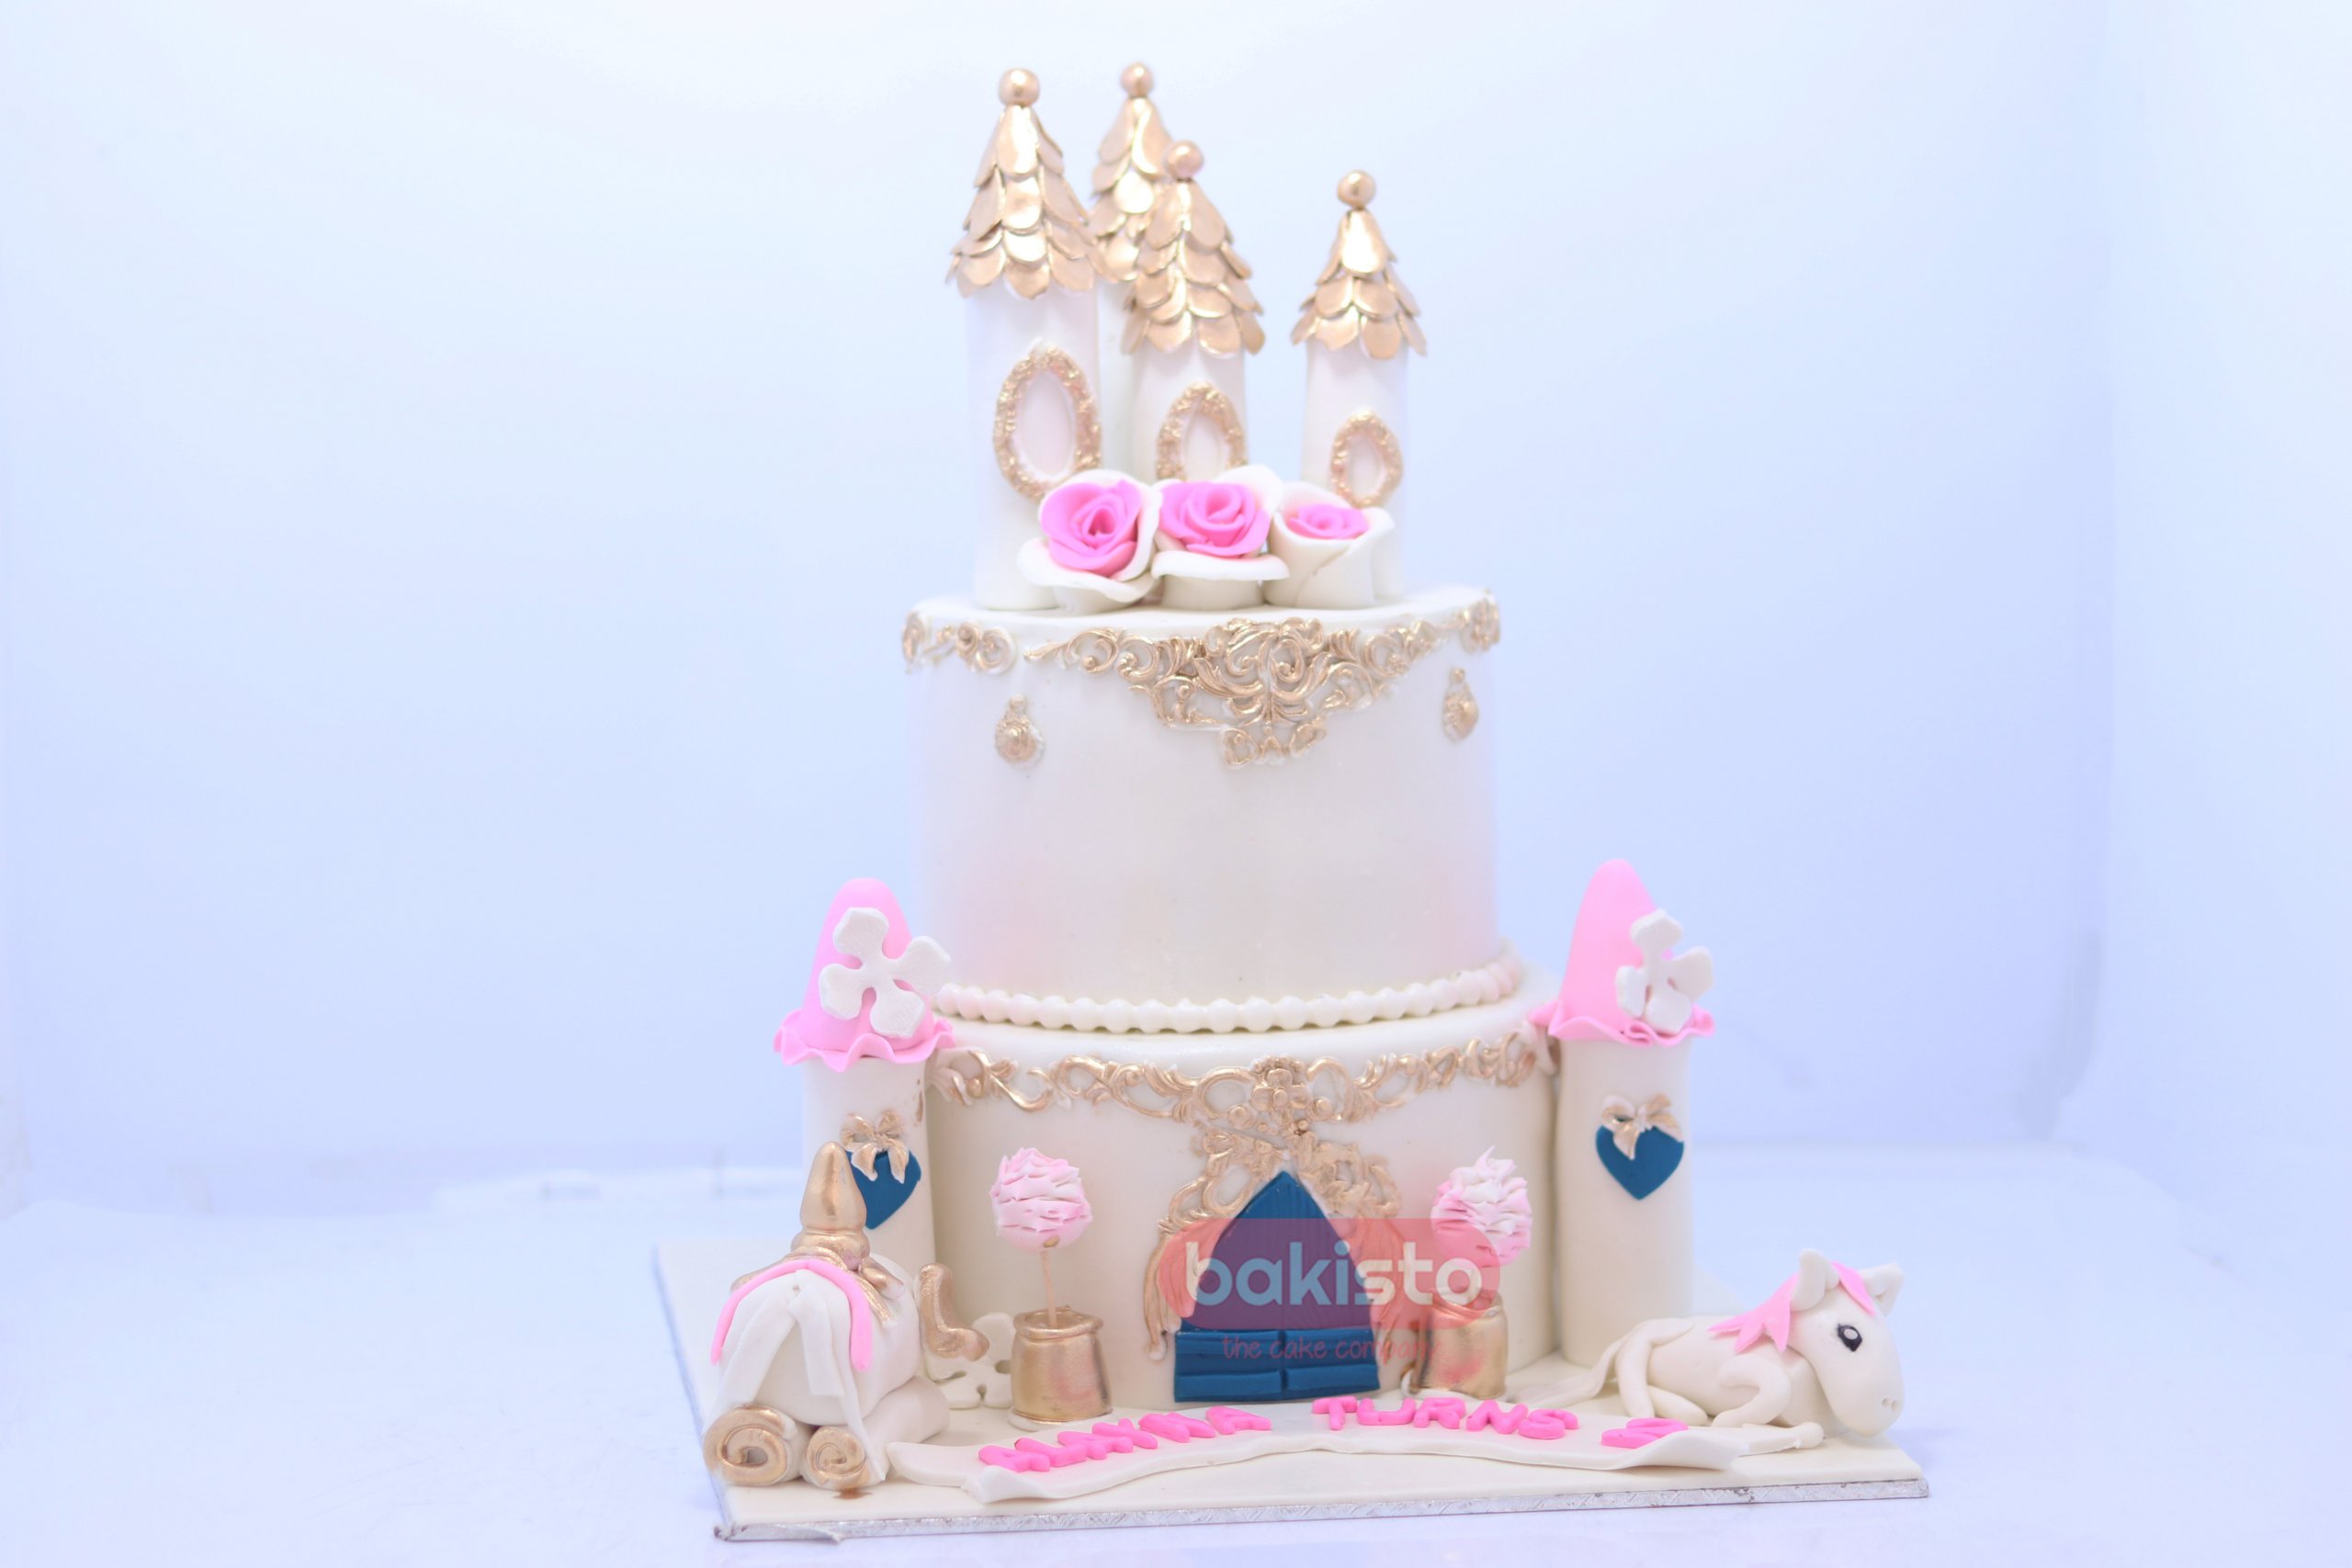 All Of The Prettiest Princess Castle Cakes - Cake Geek Magazine